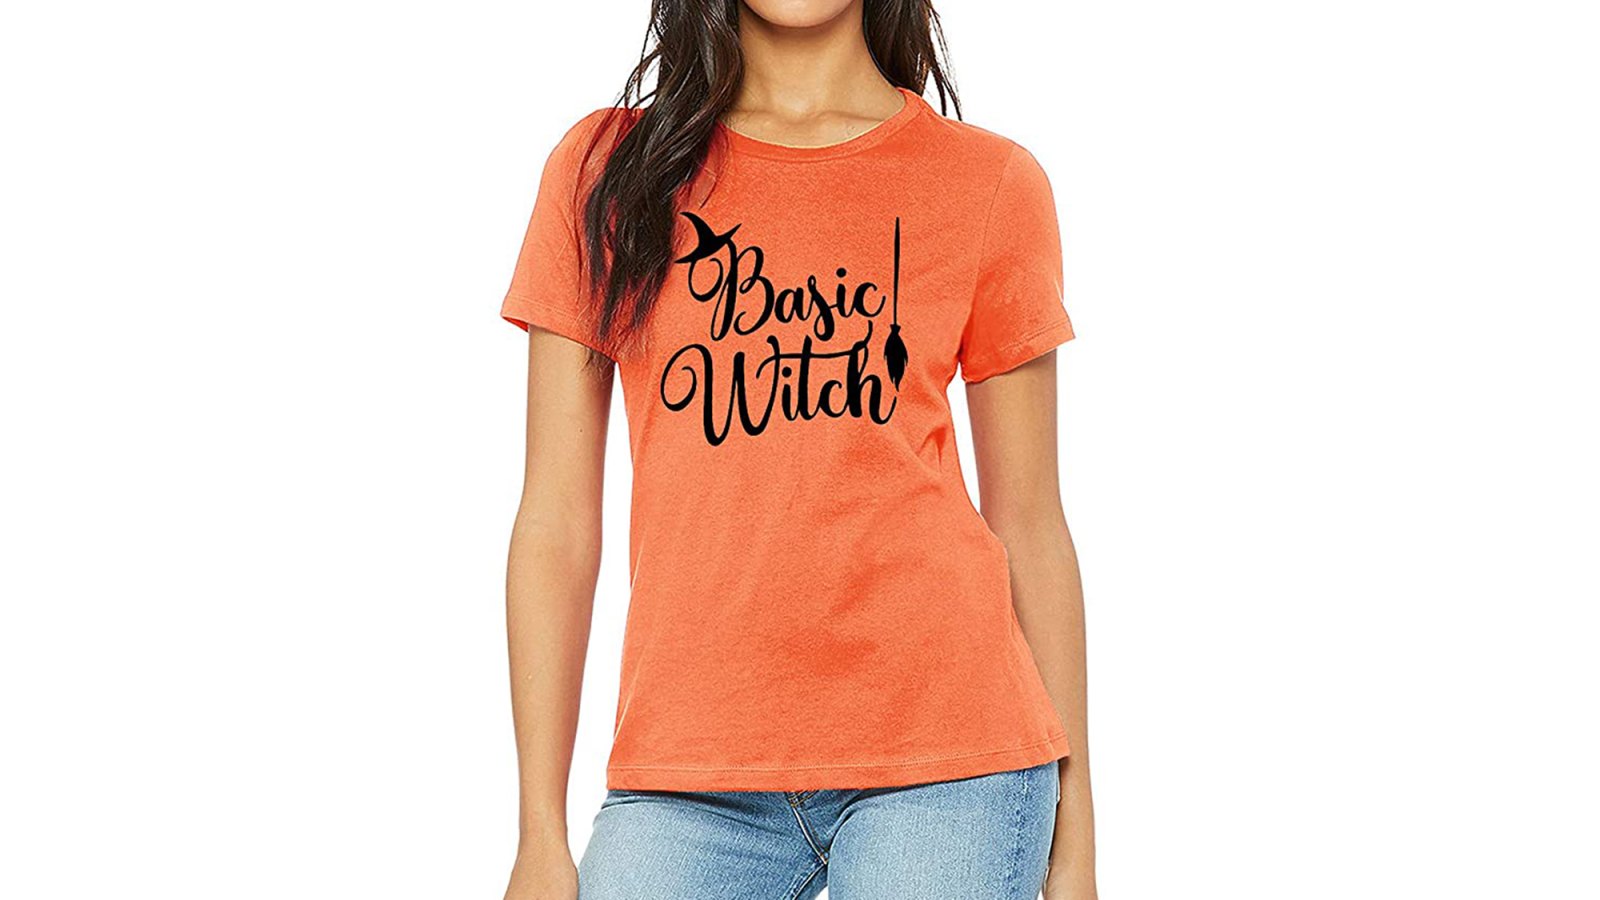 basic witch top